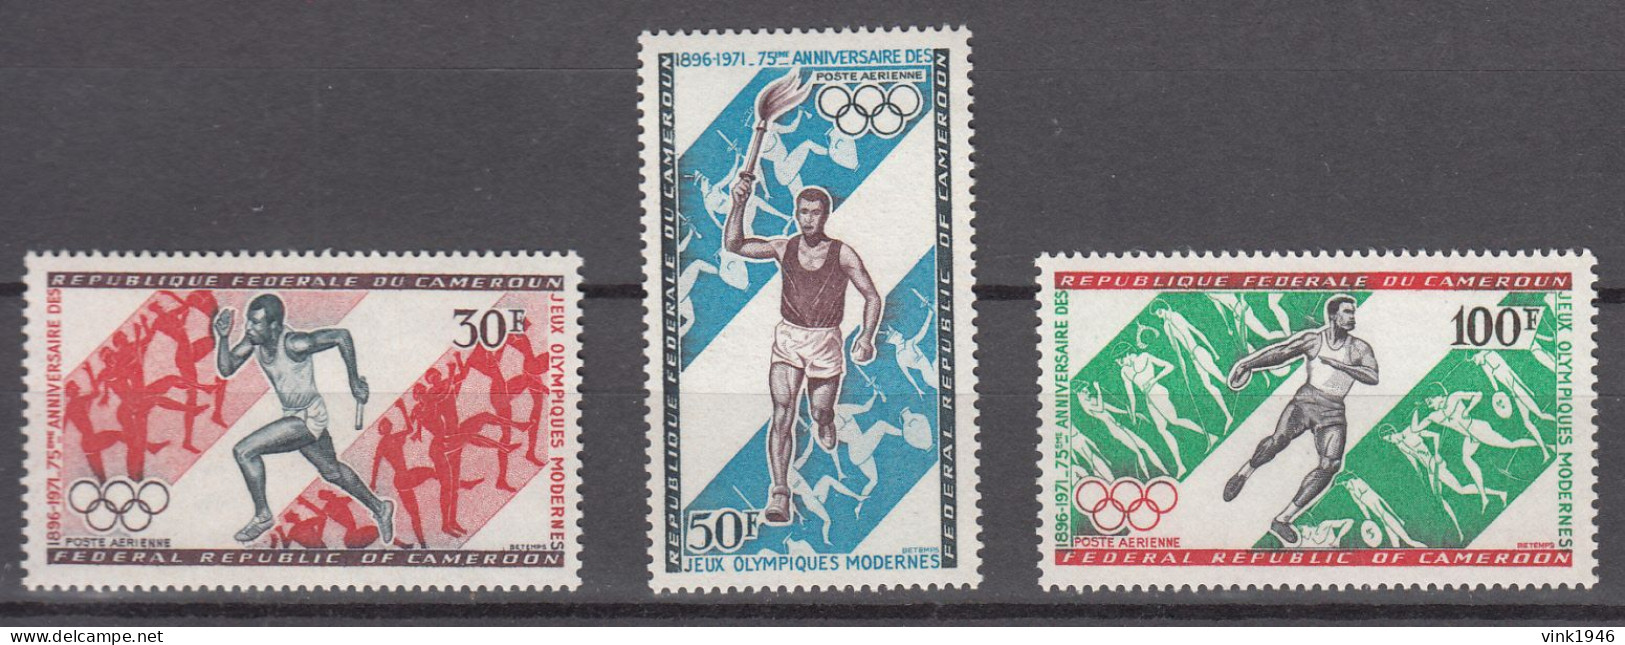 Cameroon 1971,3V,olympic Games,MNH/Postfris(A4995) - Estate 1968: Messico